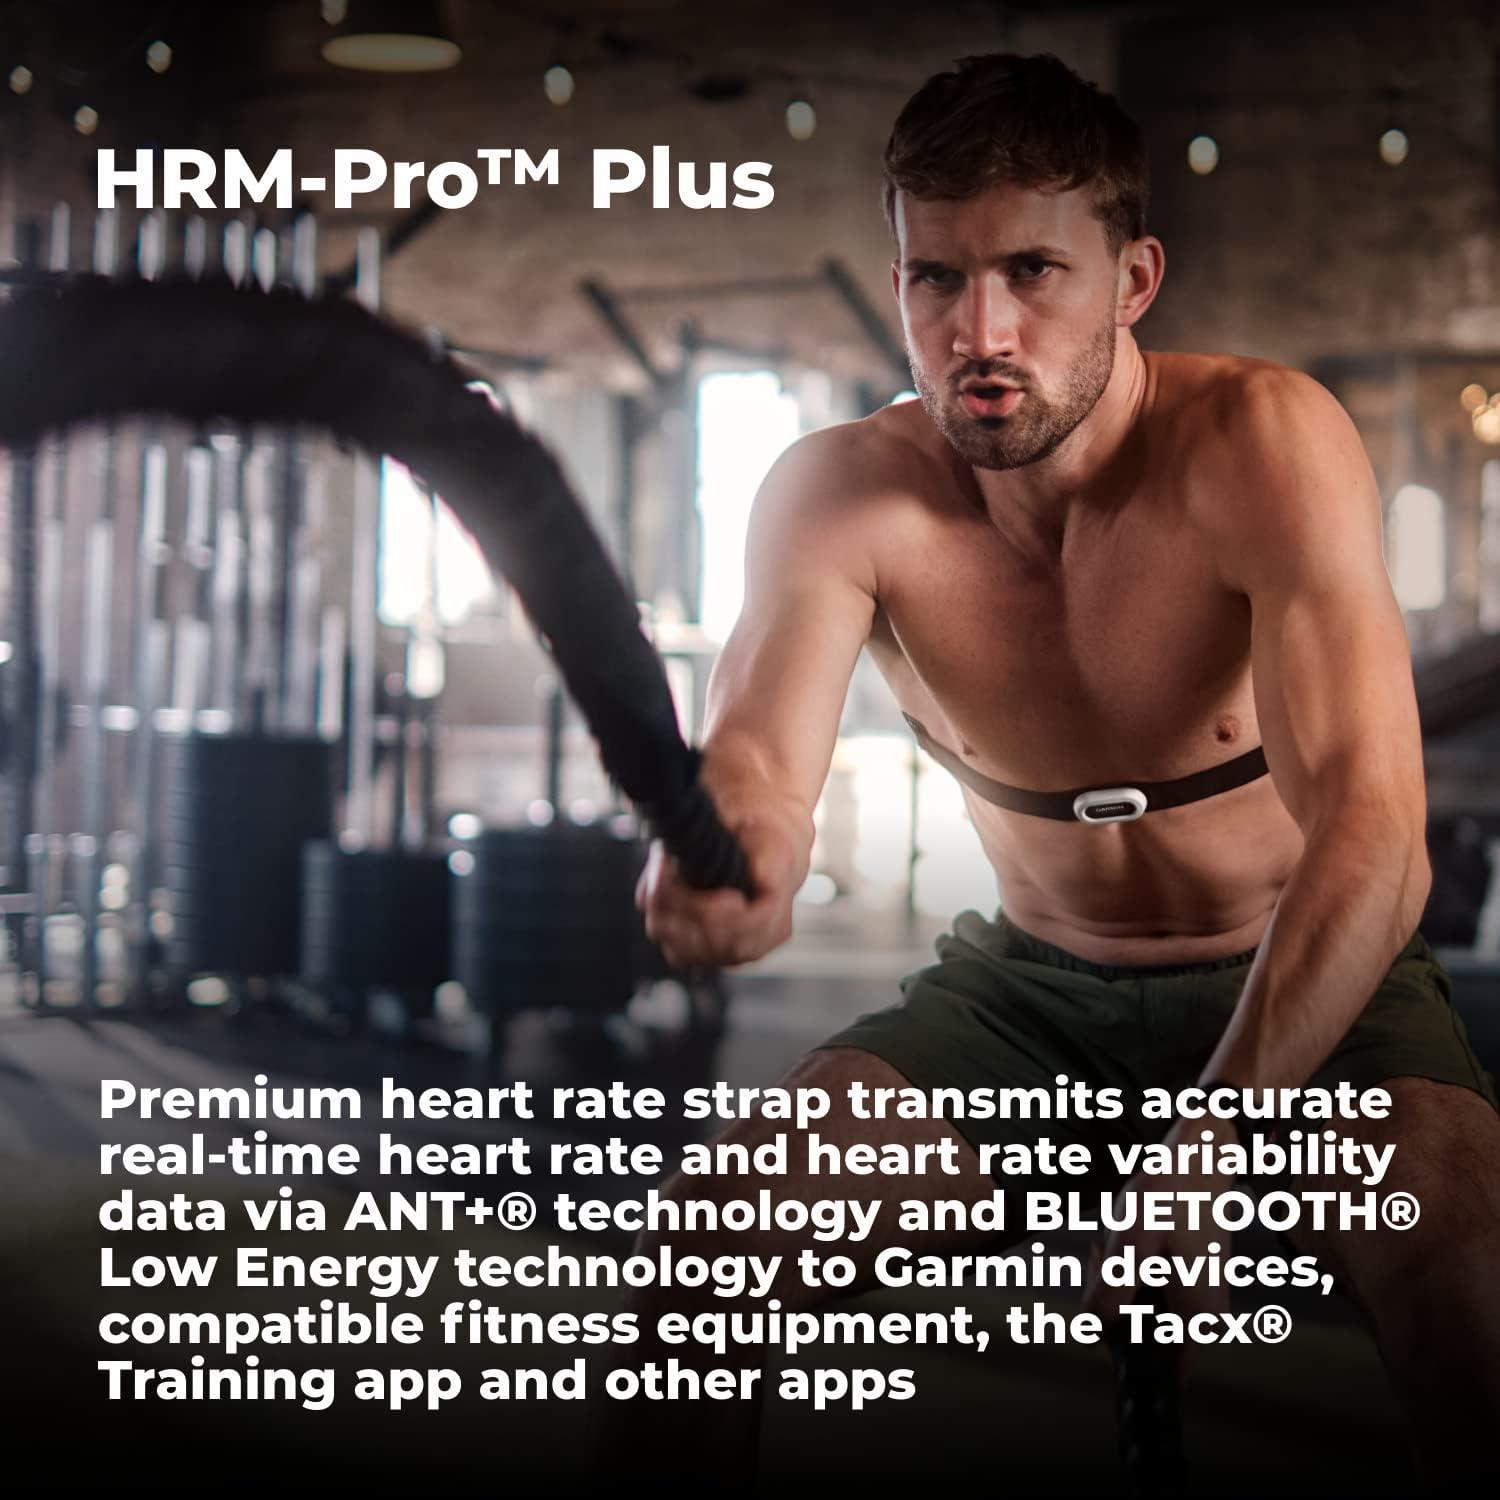 GARMIN HRM-PRO PLUS (premium heart rate monitor with dual